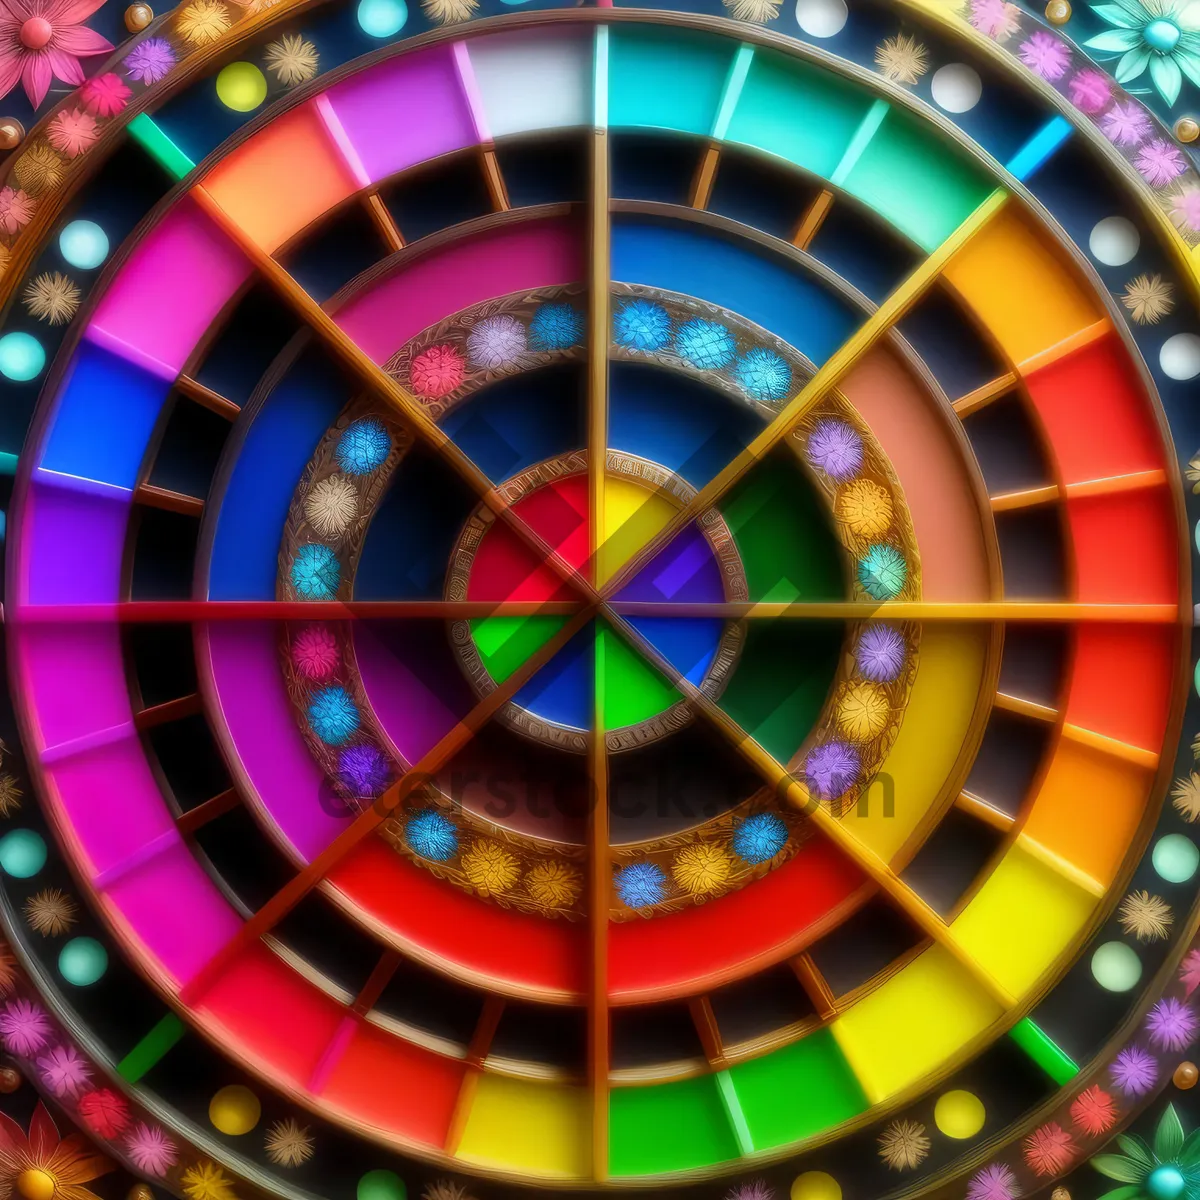 Picture of Colorful Circle Art: Graphic Mosaic Design with Modern Hippie Vibe